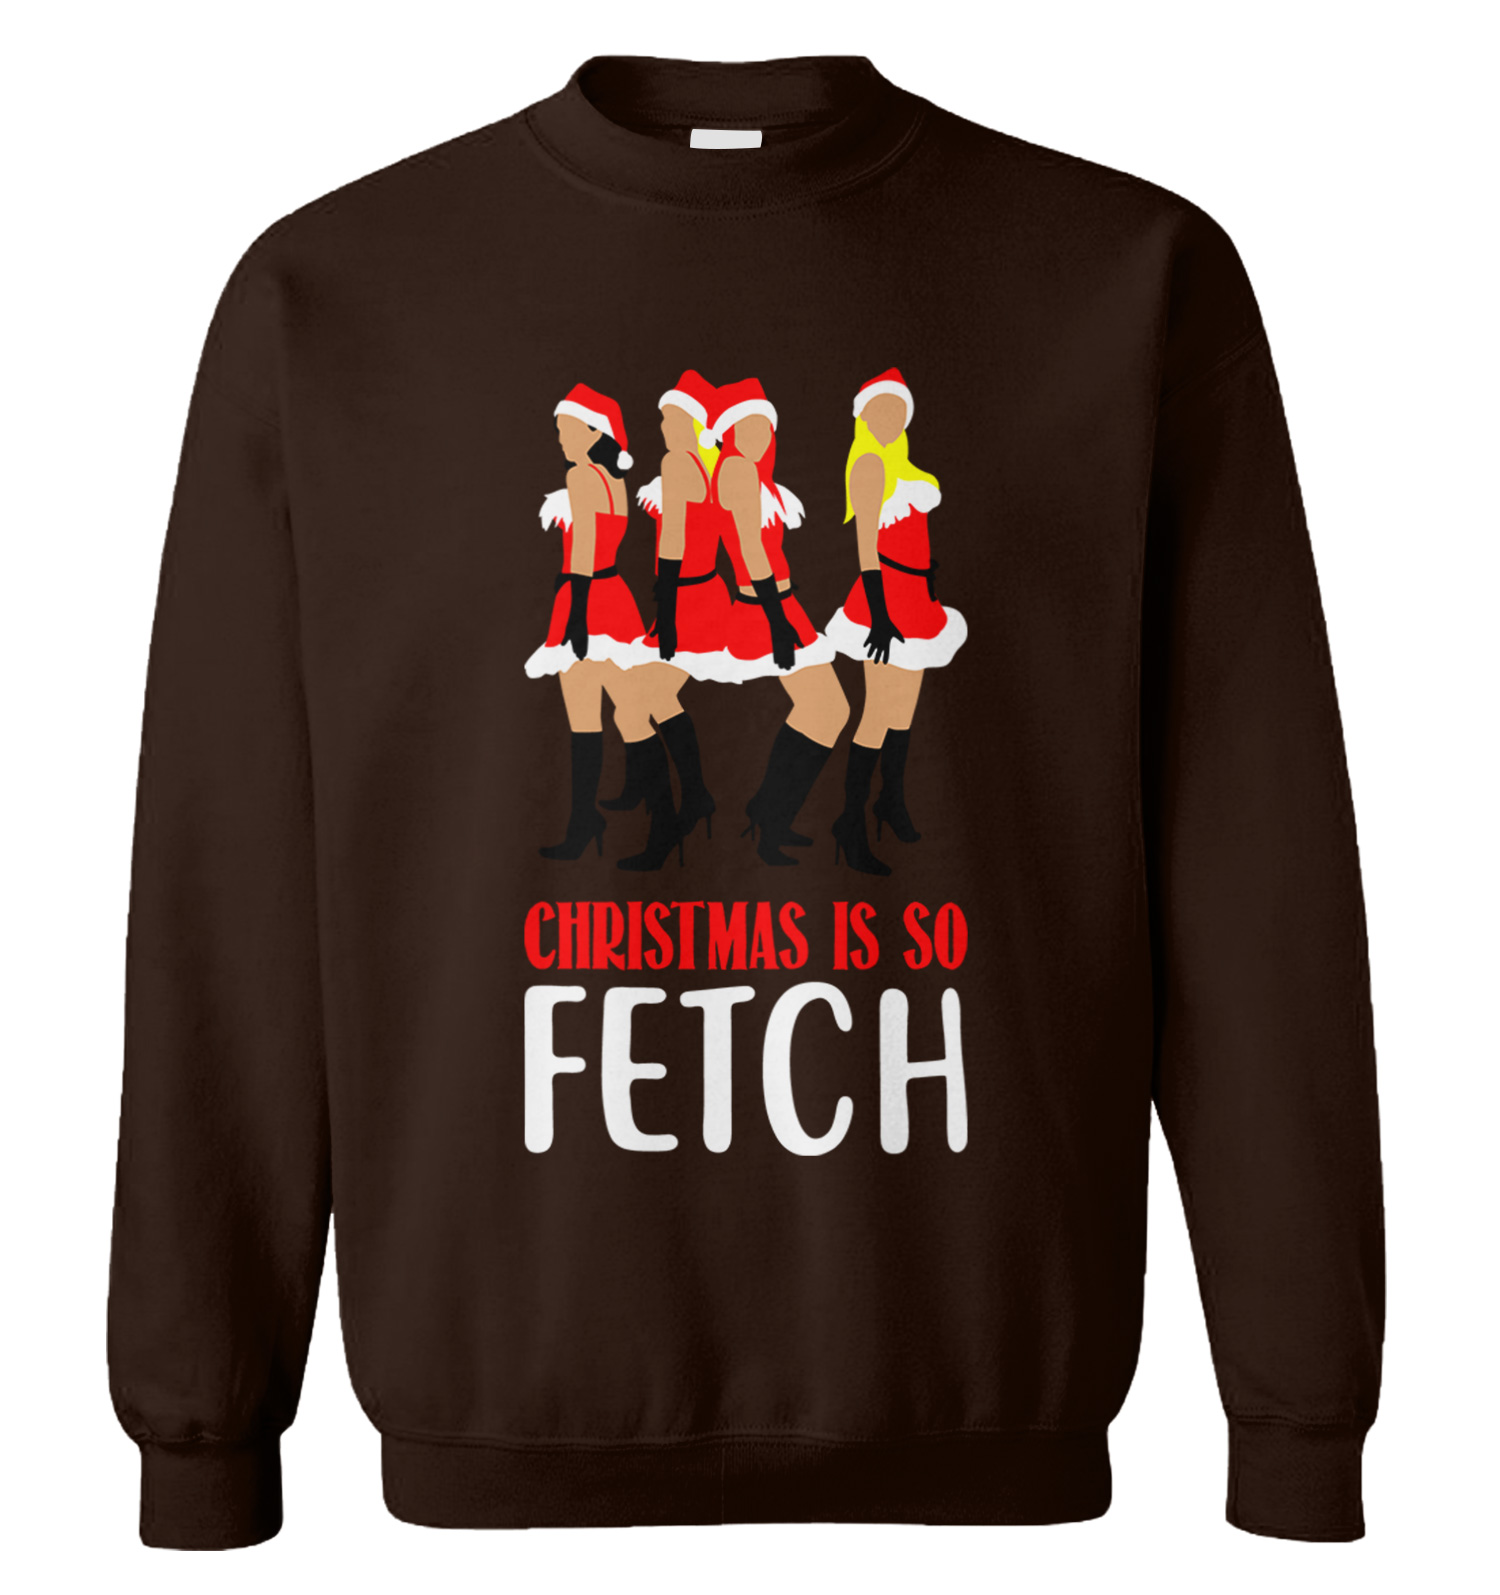 Christmas Is So Fetch - Mean Girls Movie Quote Parody Unisex